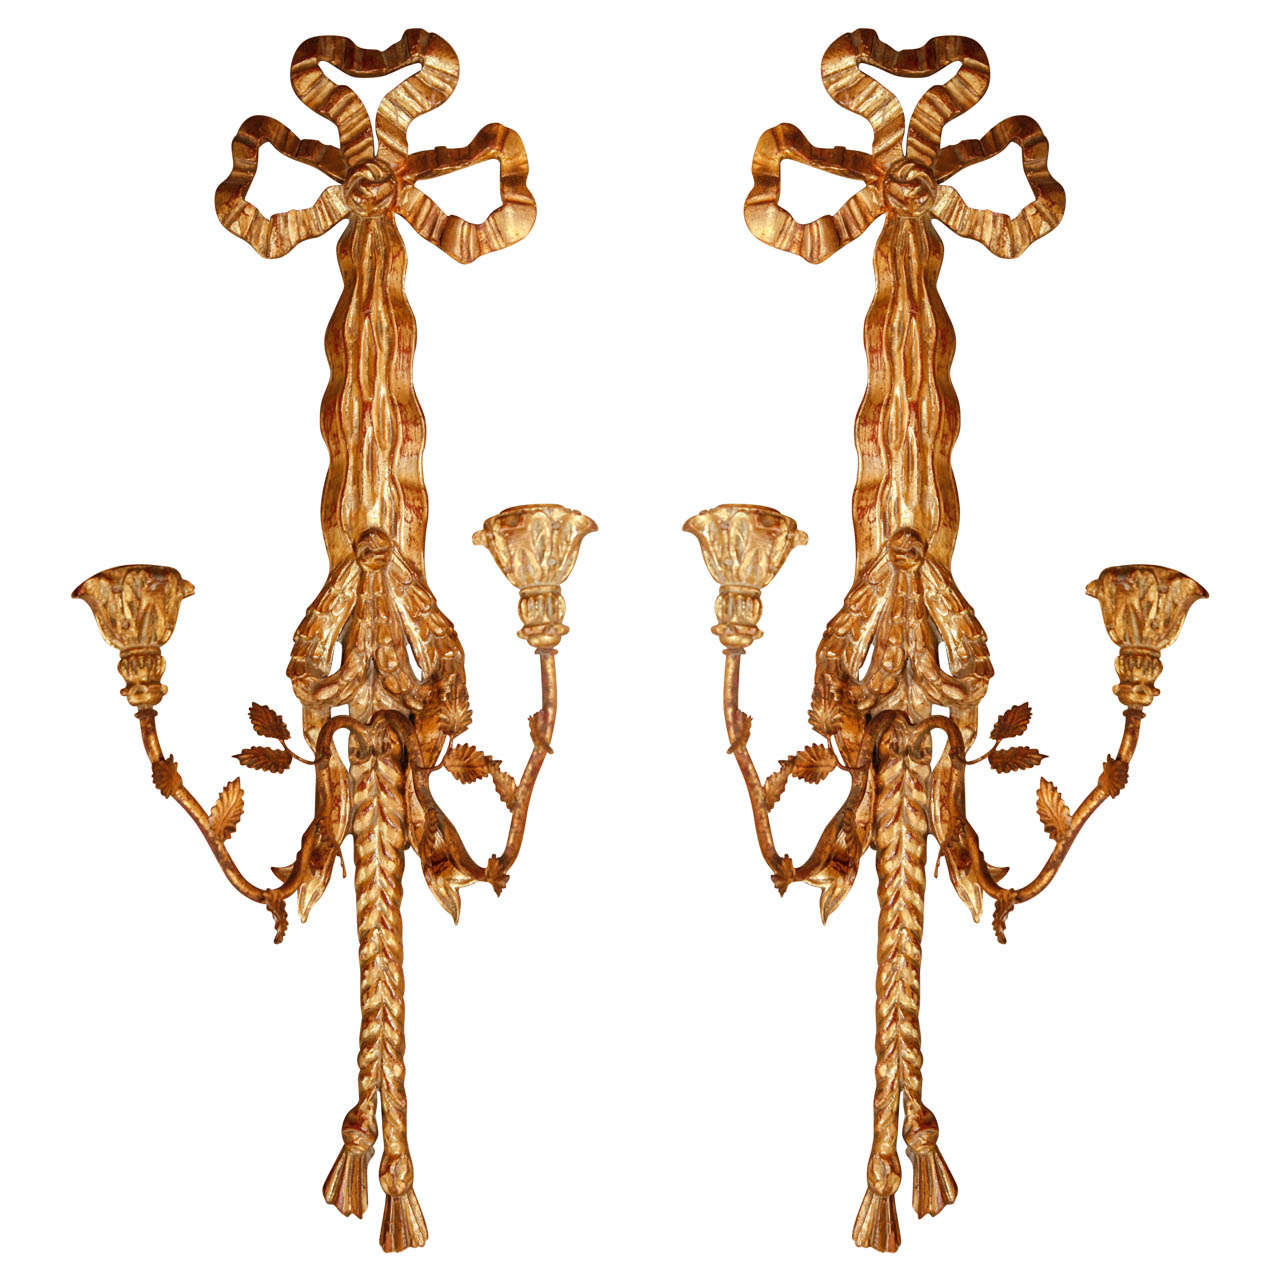 A Vintage Pair of Gold Leafed Wall Mounted Sconces